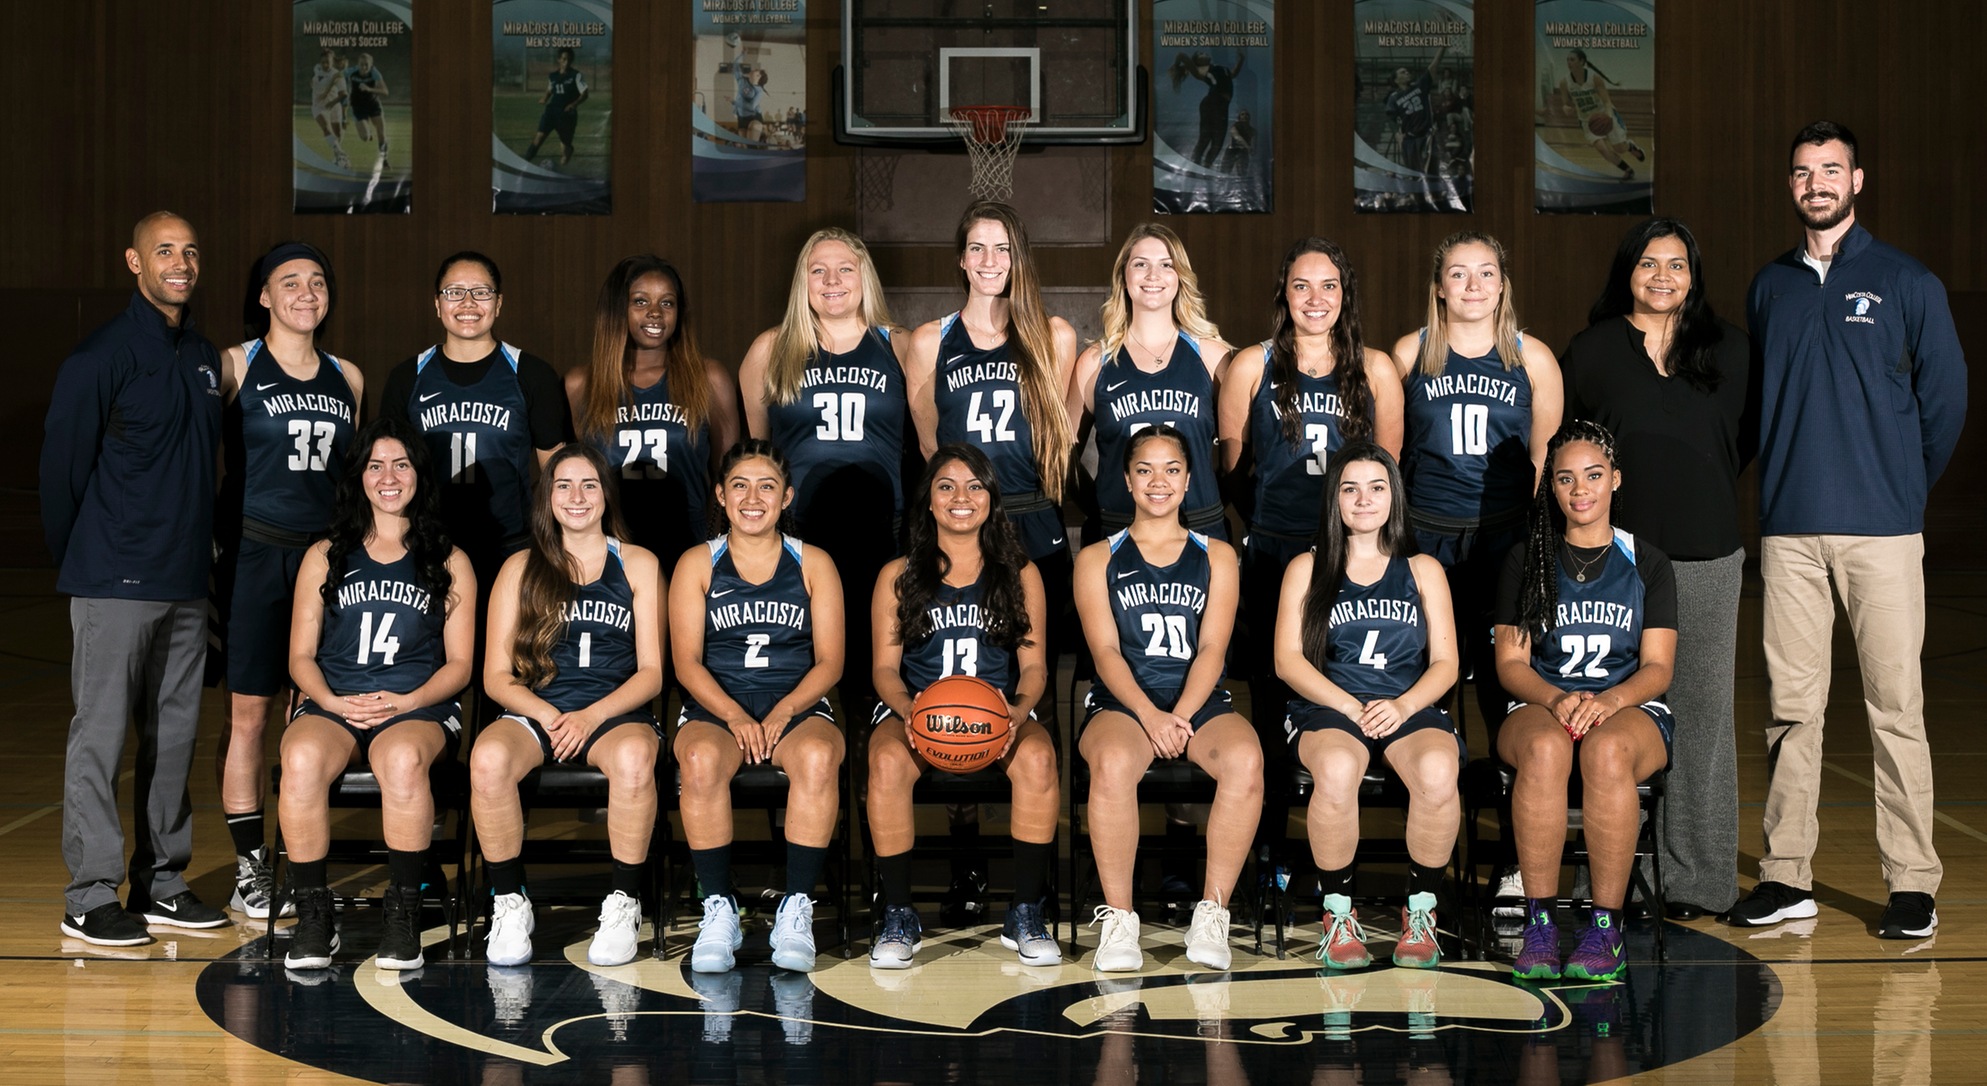 Women's Basketball Team Picture